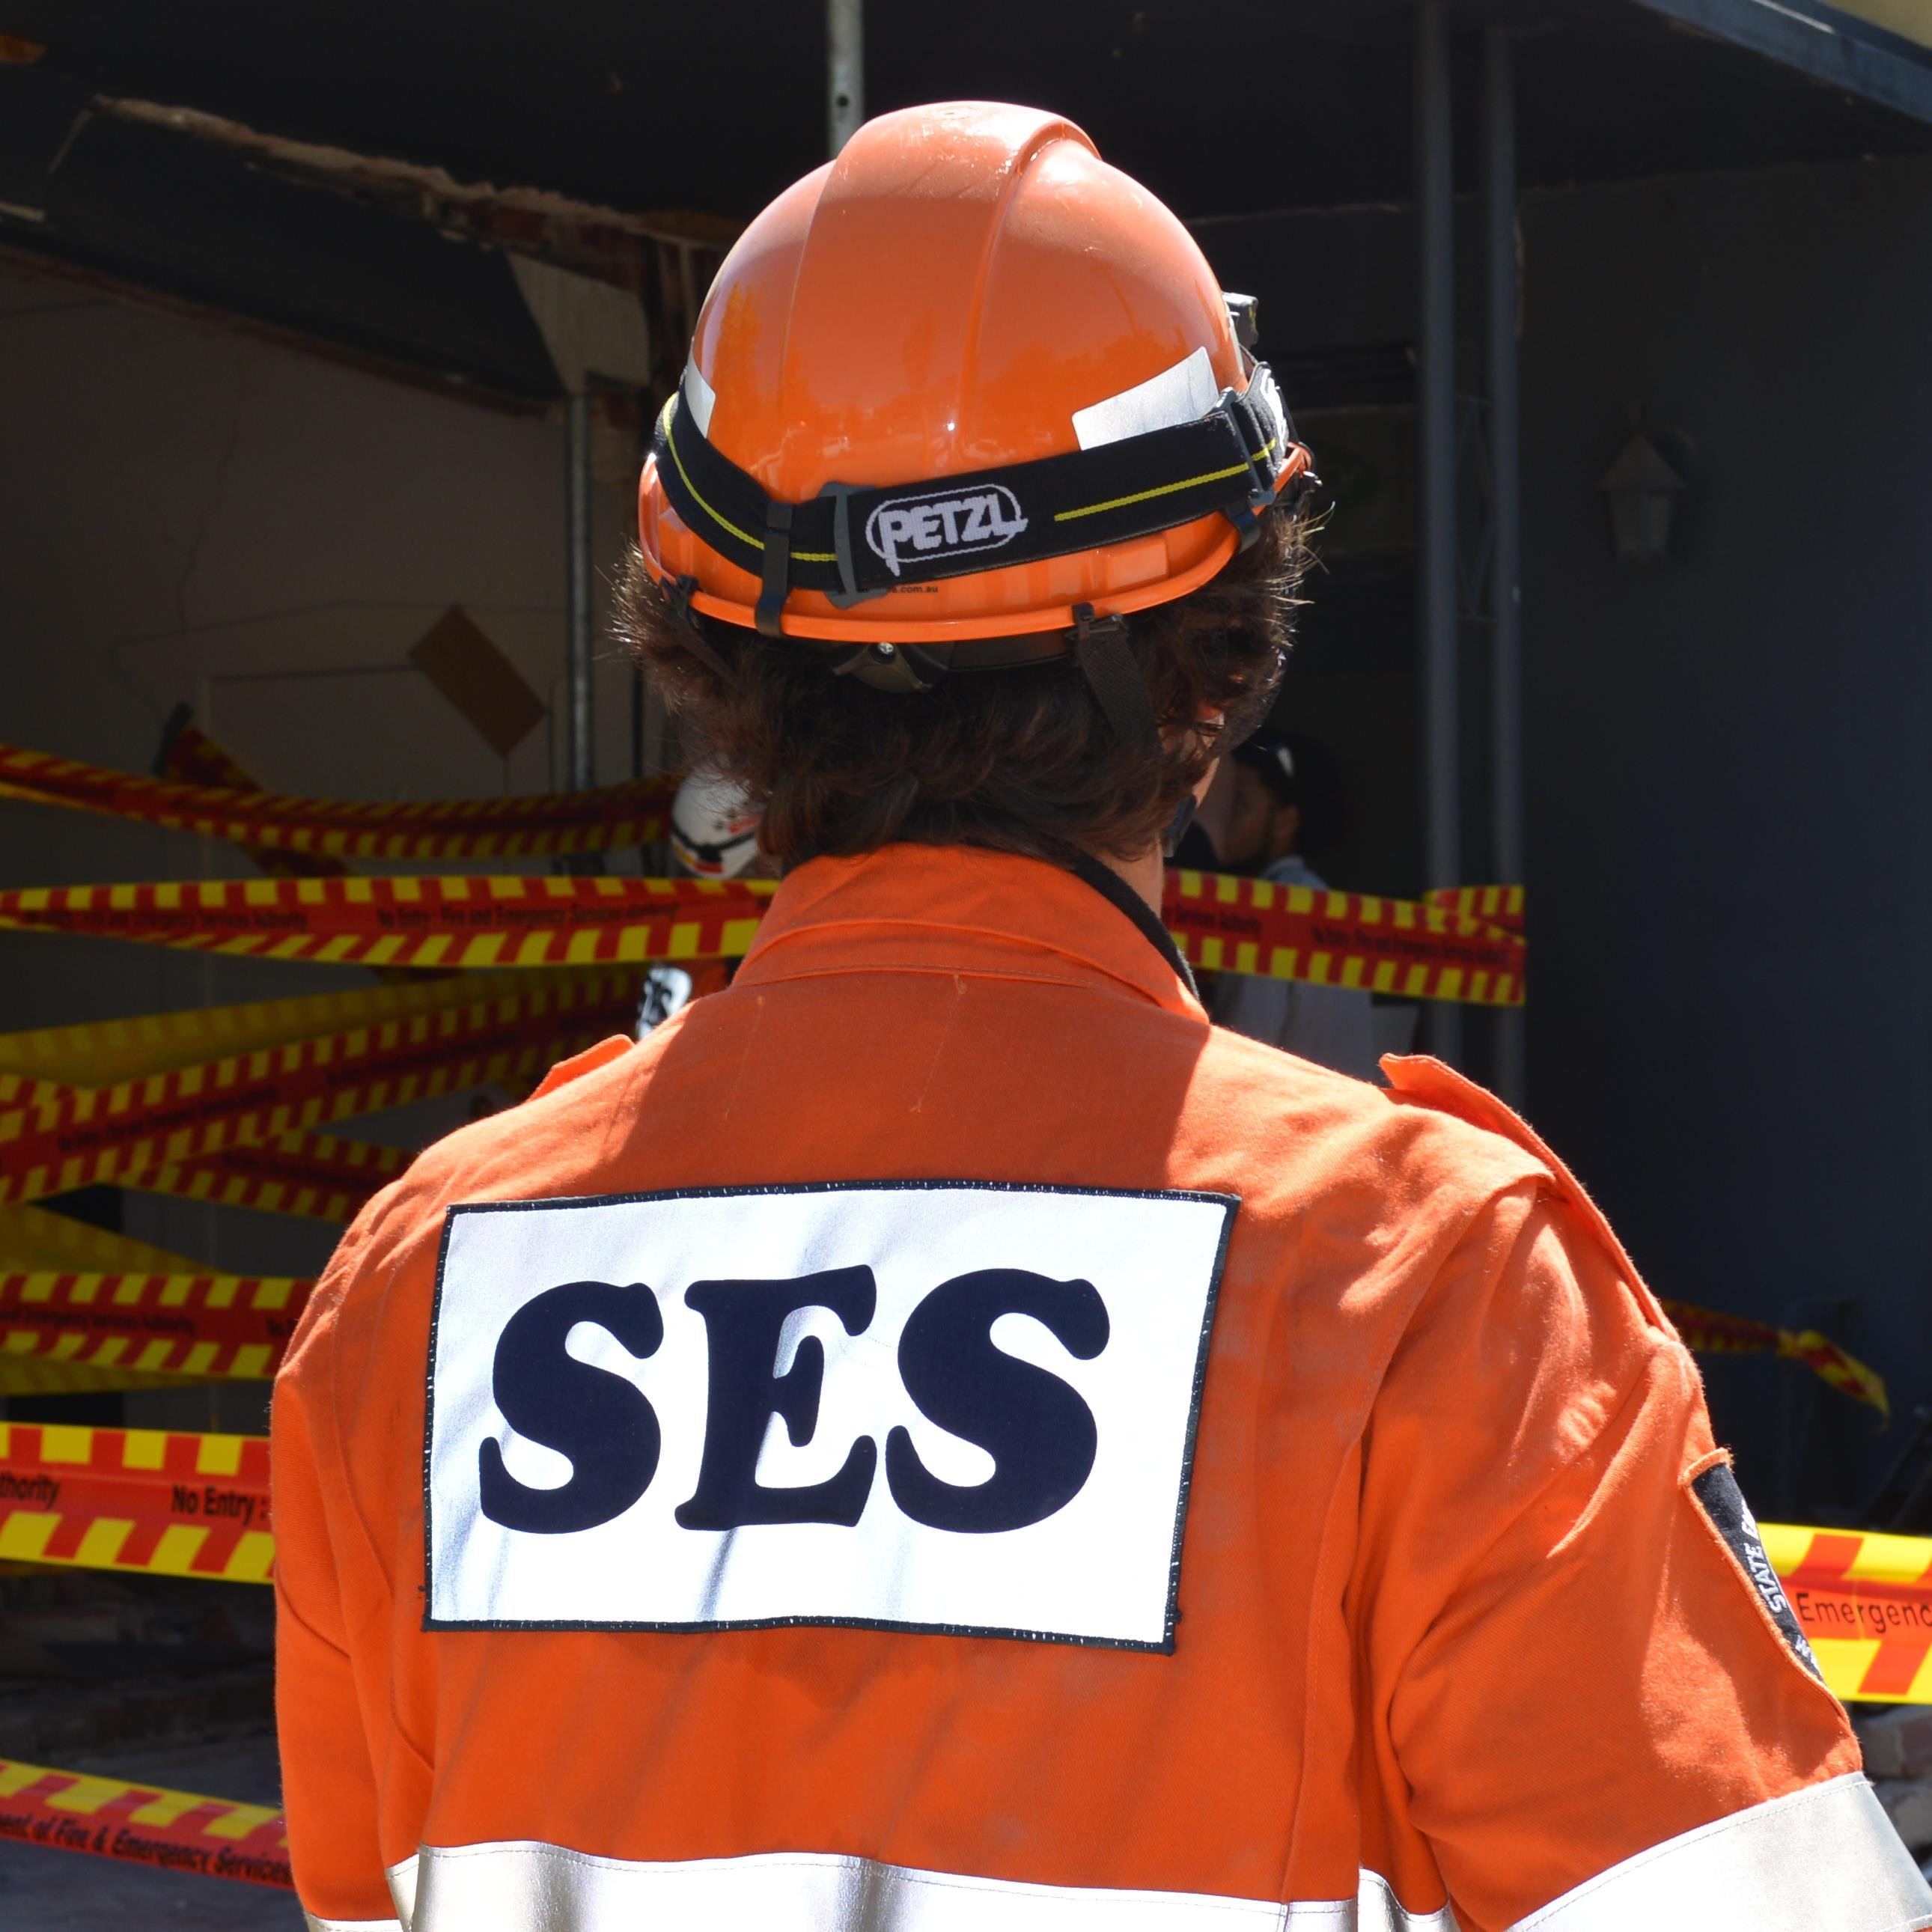 Volunteer SES unit for Perth & Western Suburbs. Call 132 500 for emergency SES assistance. In a life threatening emergency call 000. All comments are our own.